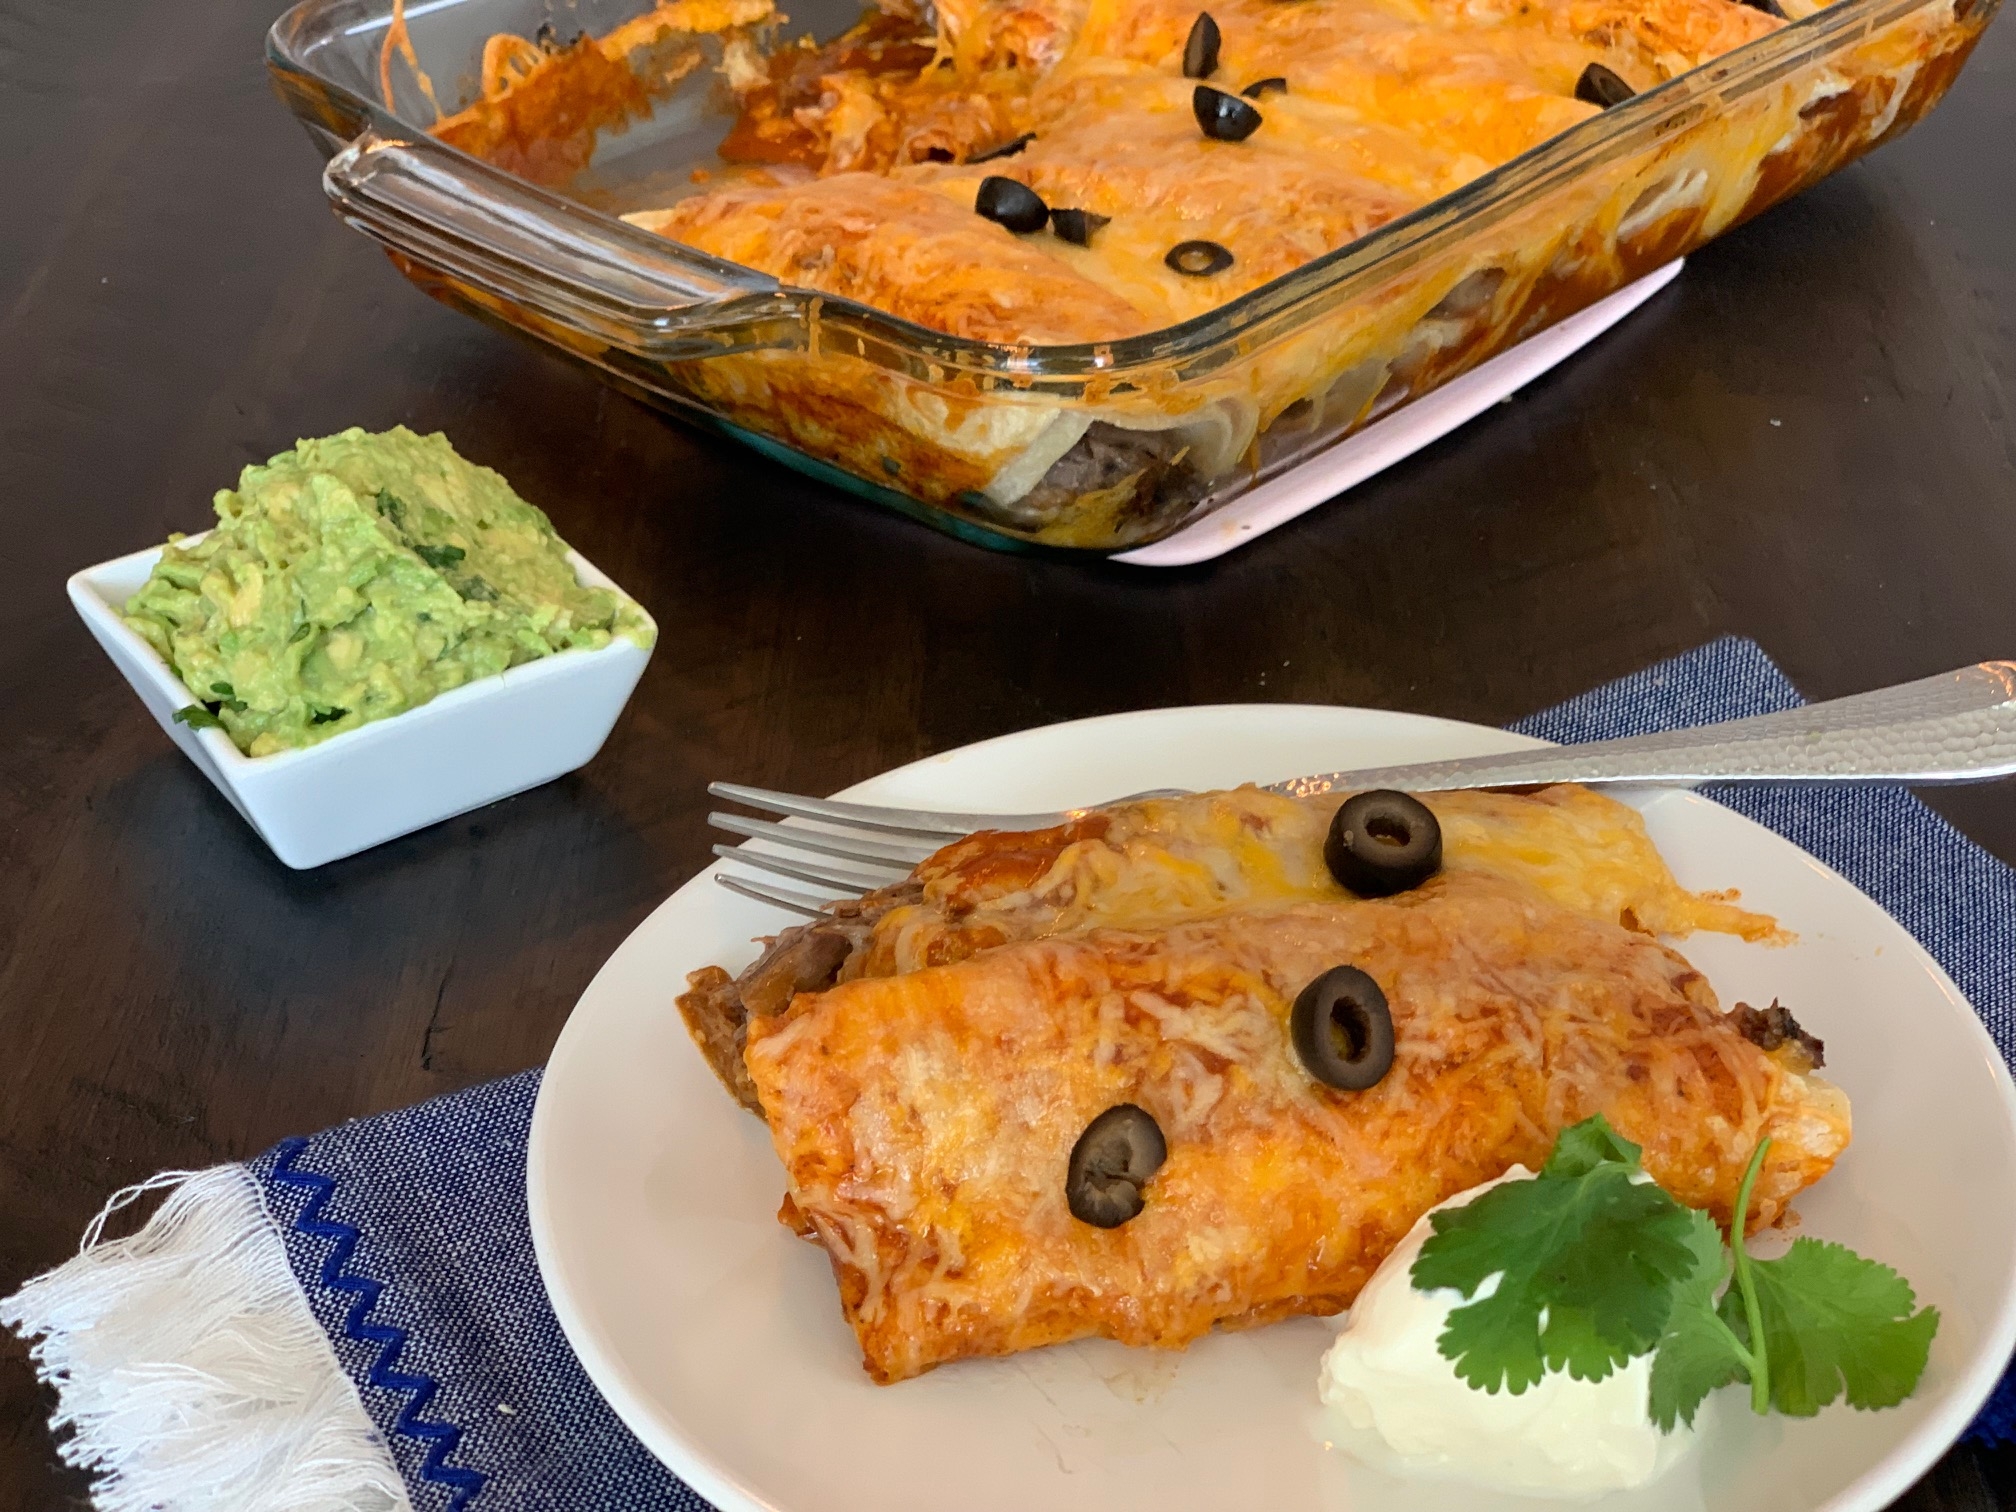 Authentic Mexican Shredded Beef Enchiladas, Shredded Beef Enchiladas, Beef Enchiladas, Easy Enchiladas, Easy Mexican Food, Authentic Mexican Recipe